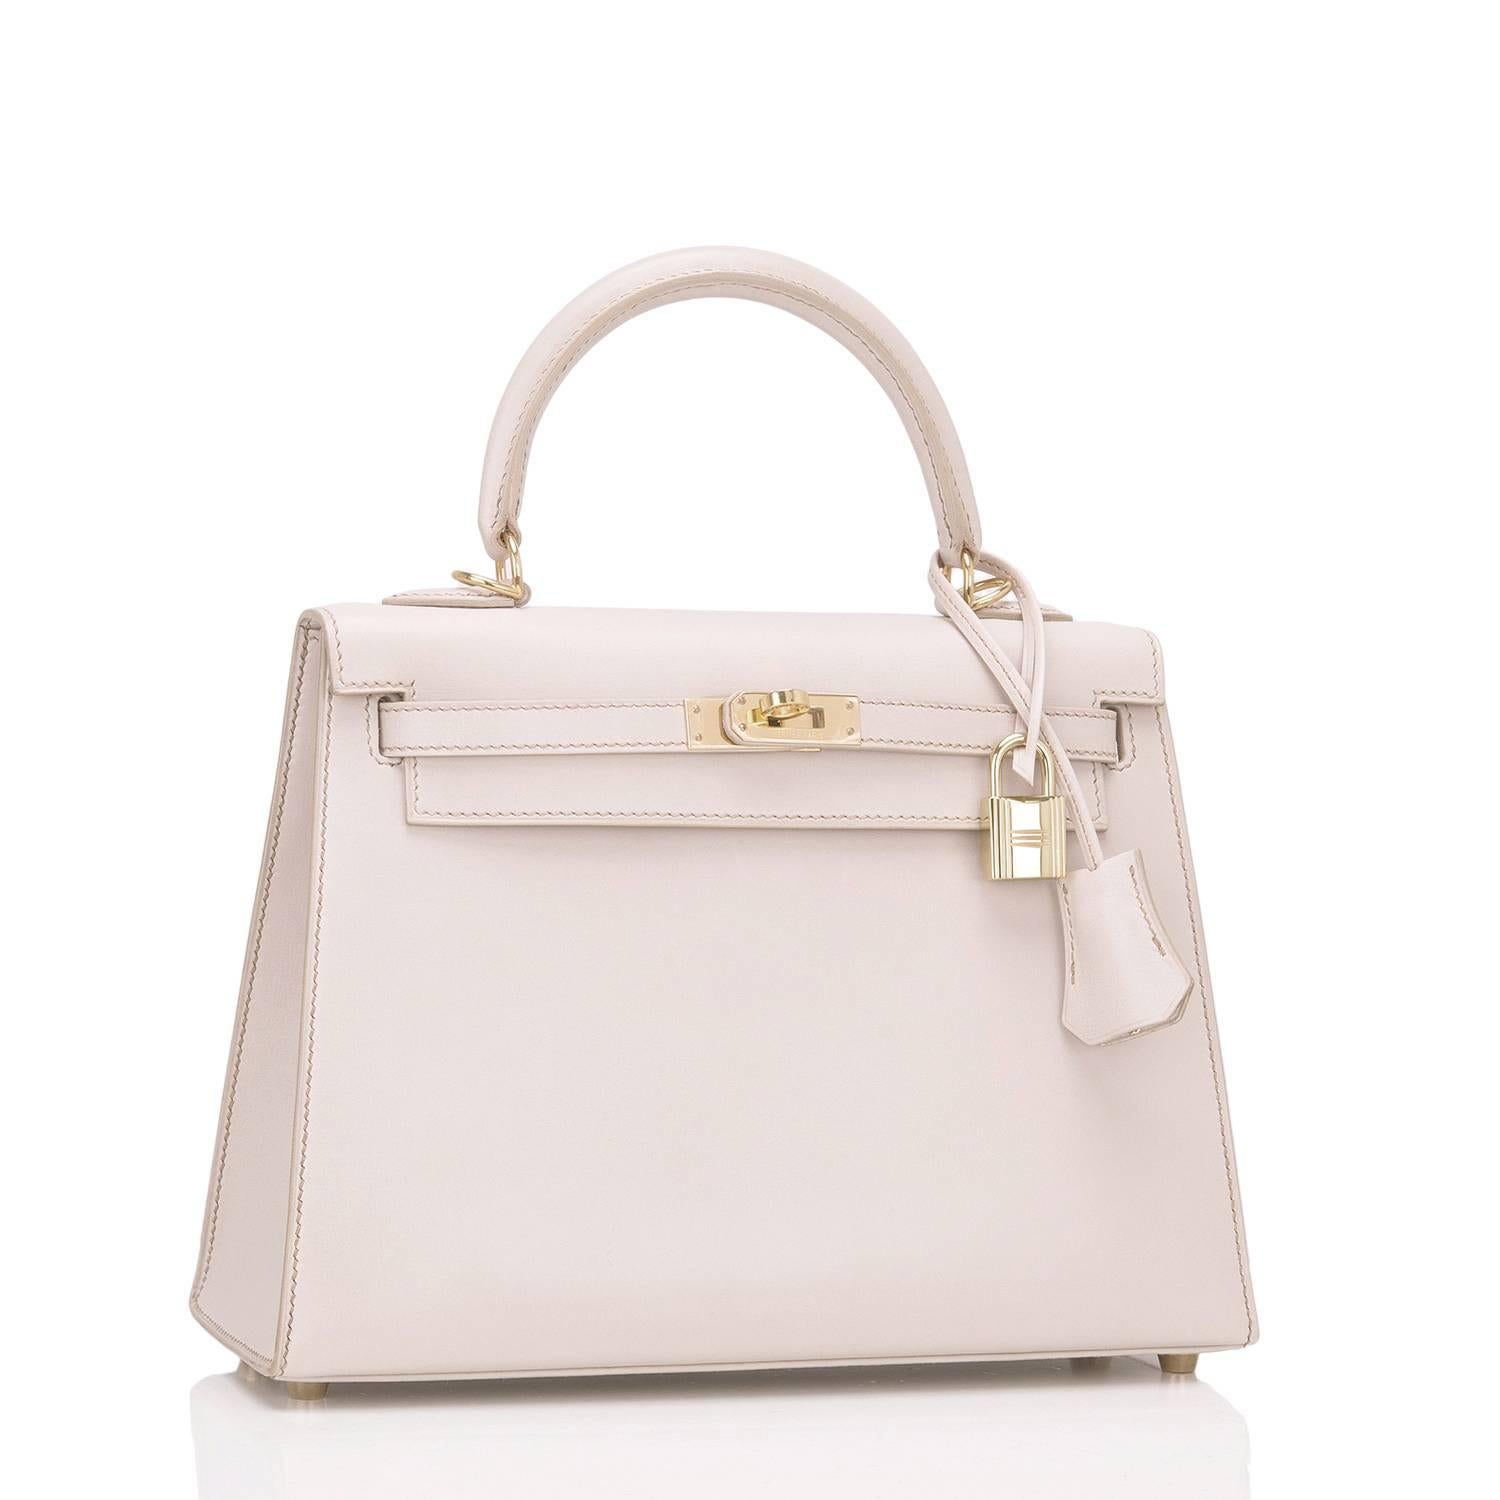 Hermes Poudre Sellier Kelly 25cm of box leather with gold hardware.

This Sellier Kelly is a collector's item and has tonal stitching, a front toggle closure, a clochette with lock and two keys, a single rolled handle and an optional shoulder